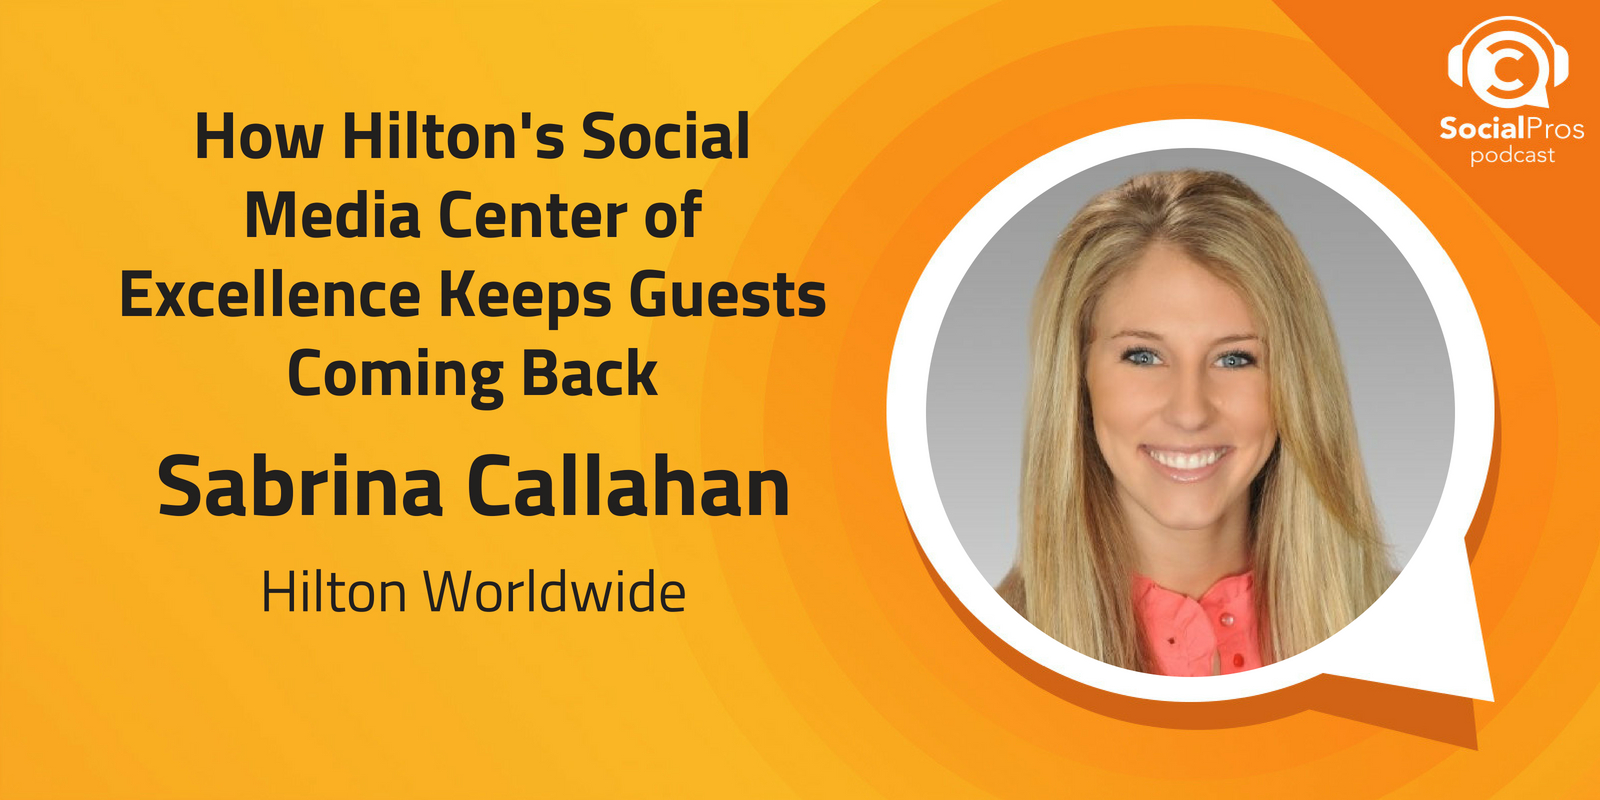 How Hilton's Social Media Center of Excellence Keeps Guests Coming Back